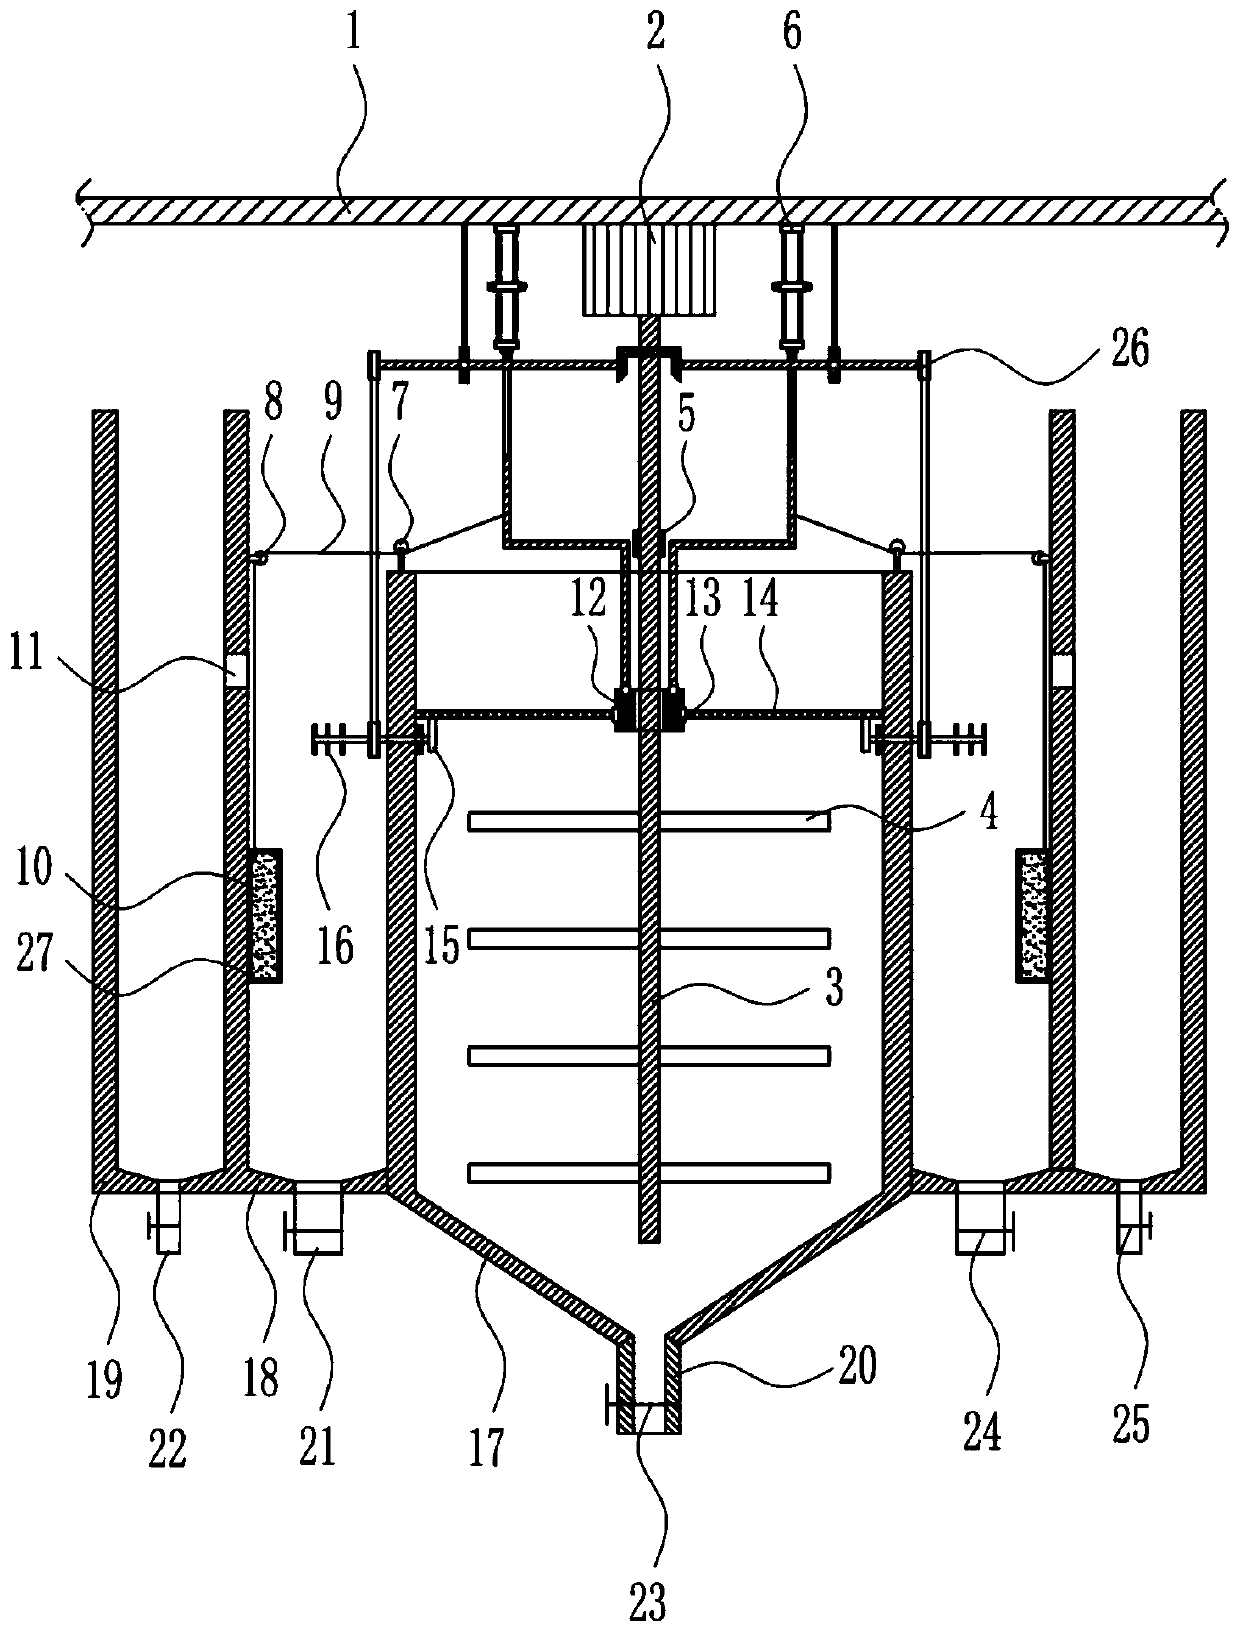 Production equipment capable of separating regenerative polyester bottle chips through specific gravity method